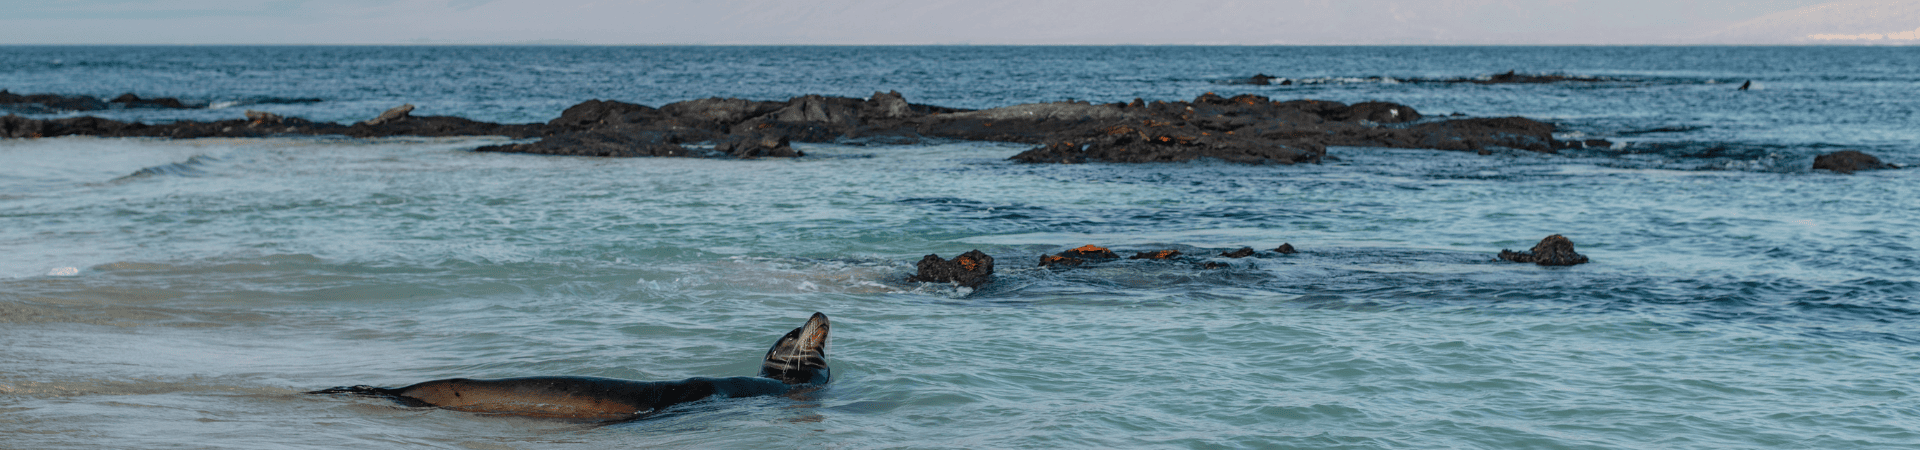 swimming with wildlife - sea lions